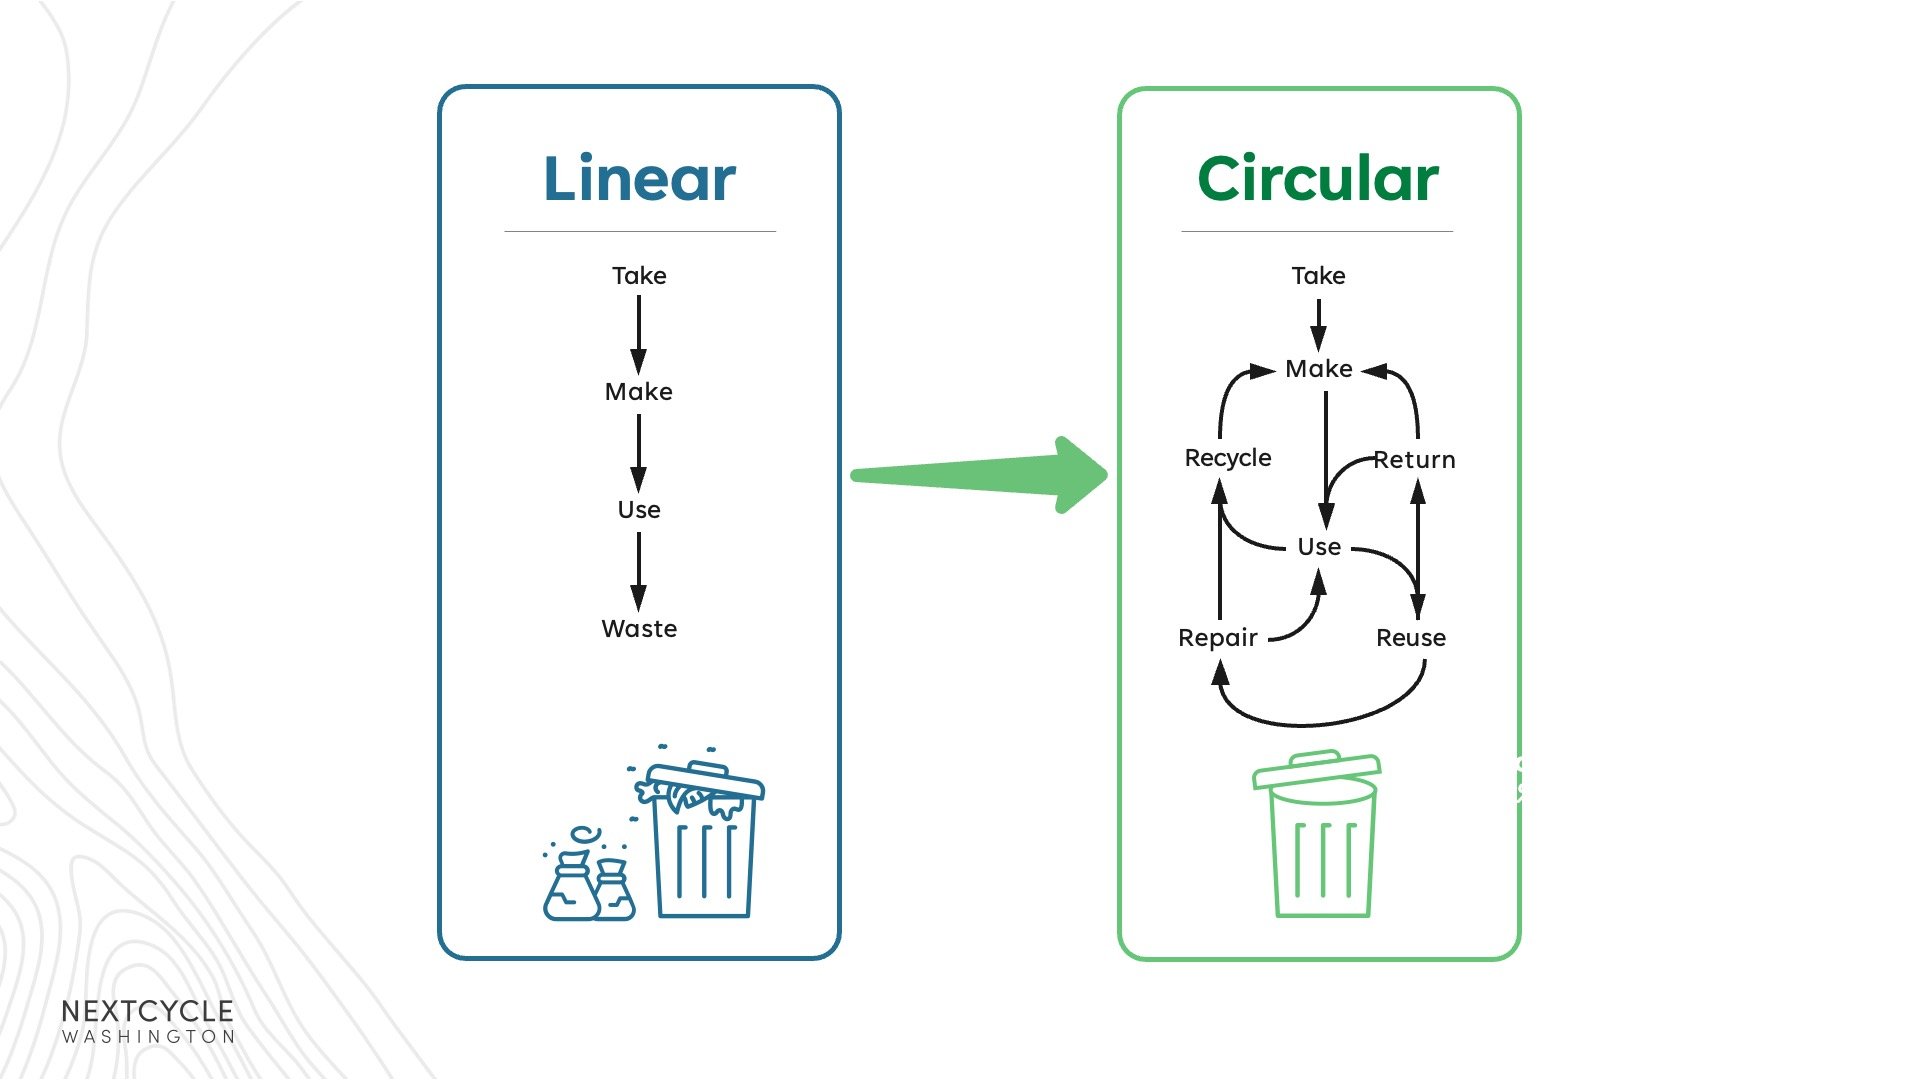 A graphic illustrating a straight line for the linear economy, opposed to the circular economy that includes recycling, reuse, and repair. 